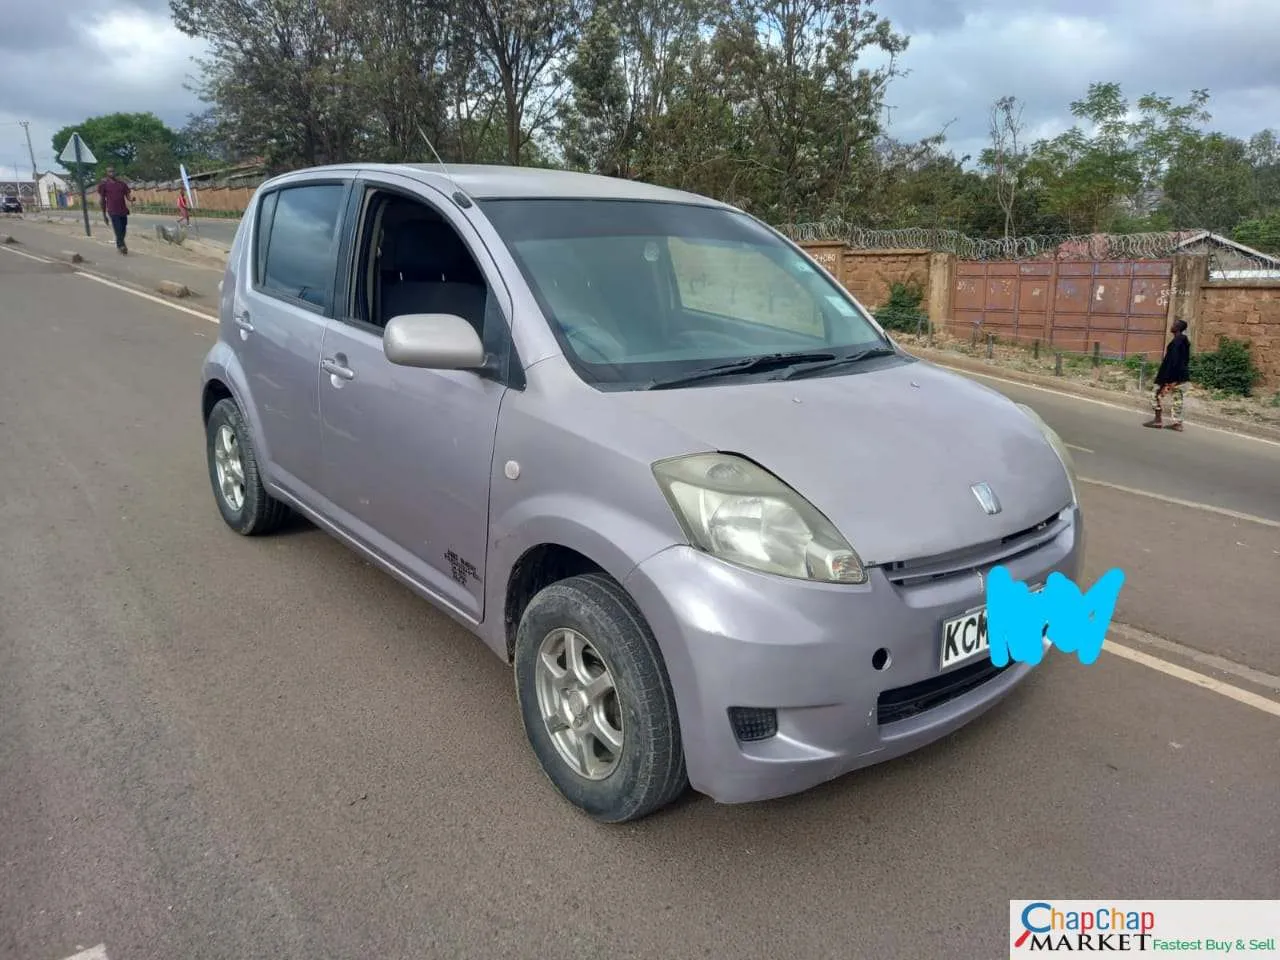 Cars Cars For Sale-Toyota PASSO kenya KCM 370K ONLY You Pay 20% Deposit Trade in OK Toyota Passo for sale in kenya hire purchase installments EXCLUSIVE 5